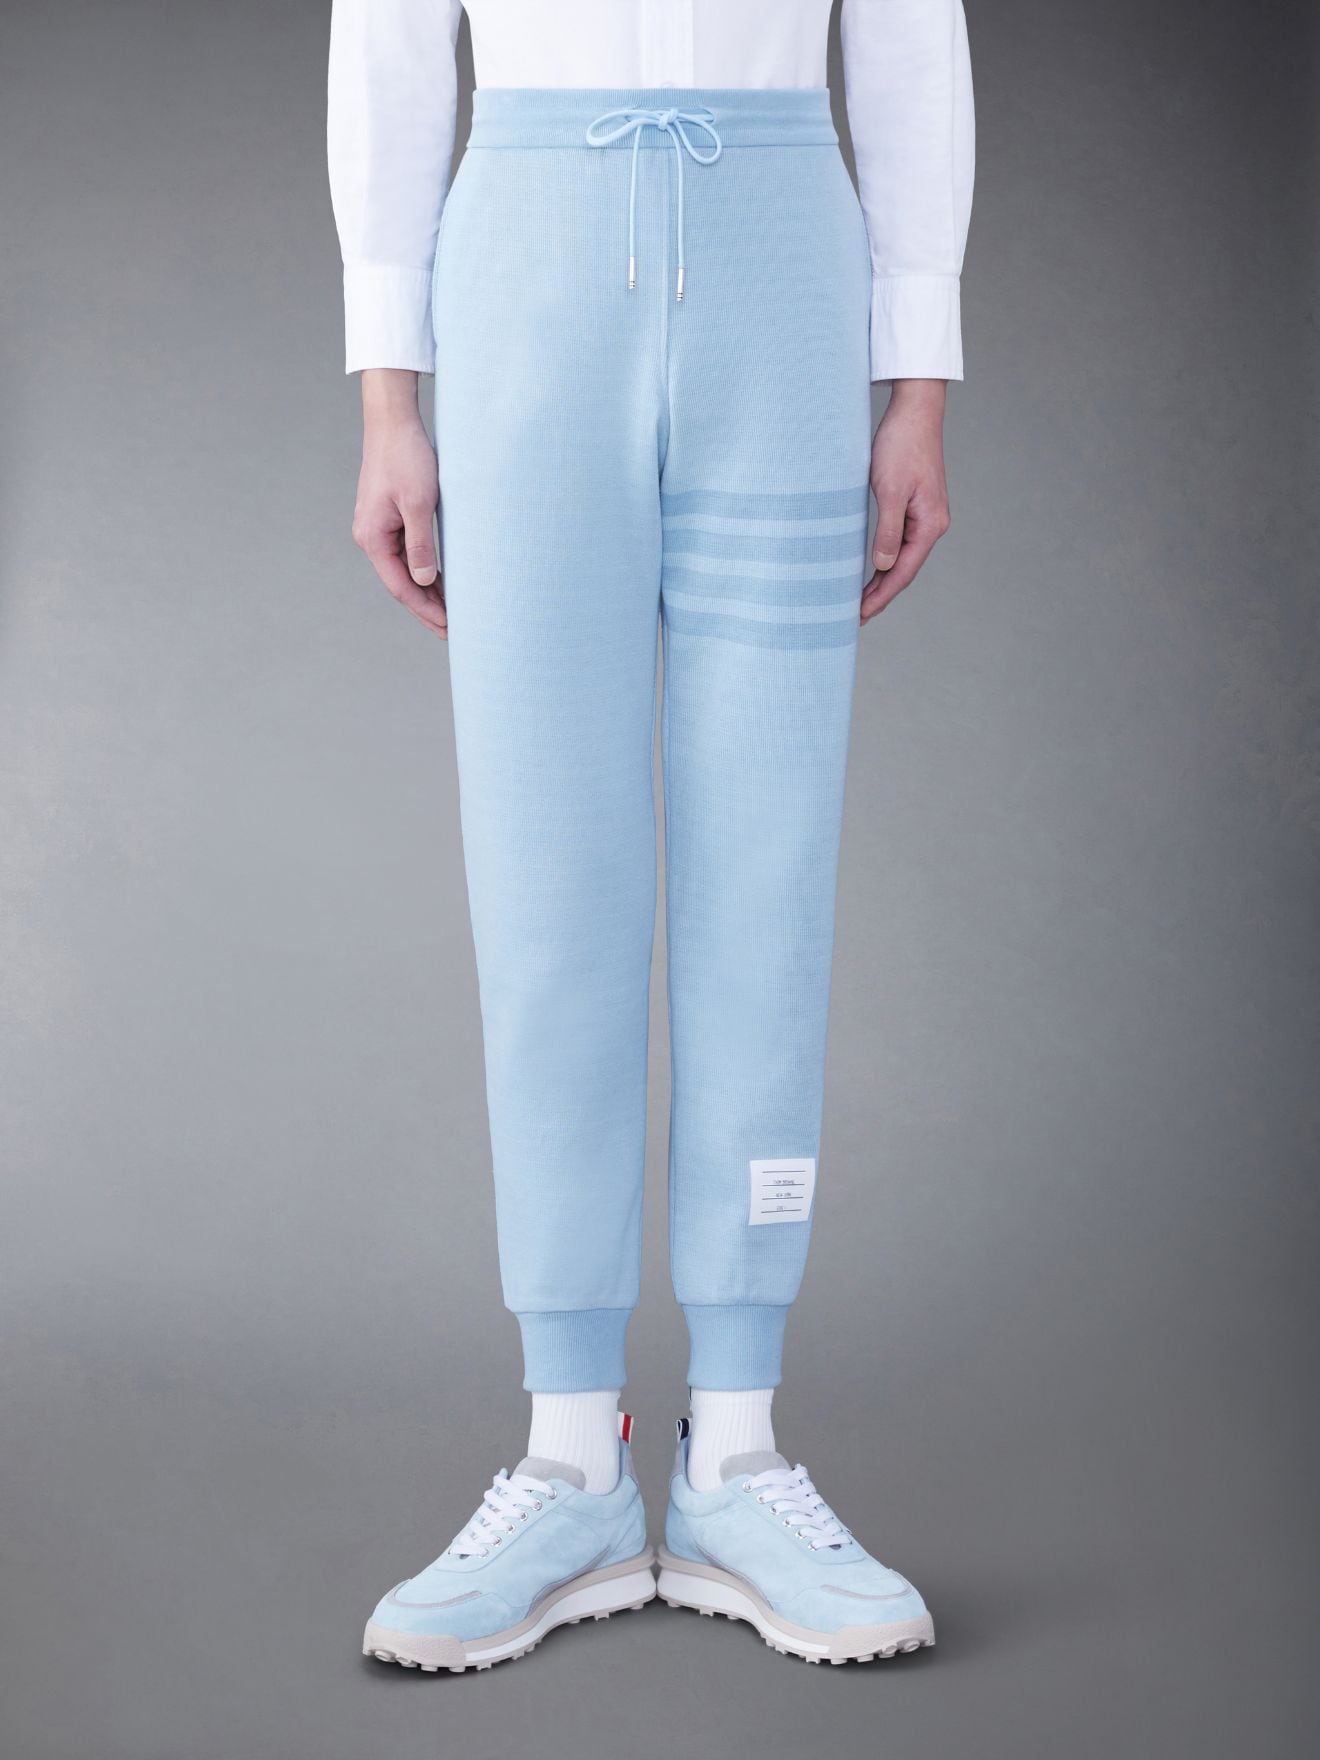 Double Face Knit 4-Bar Sweatpants | Thom Browne